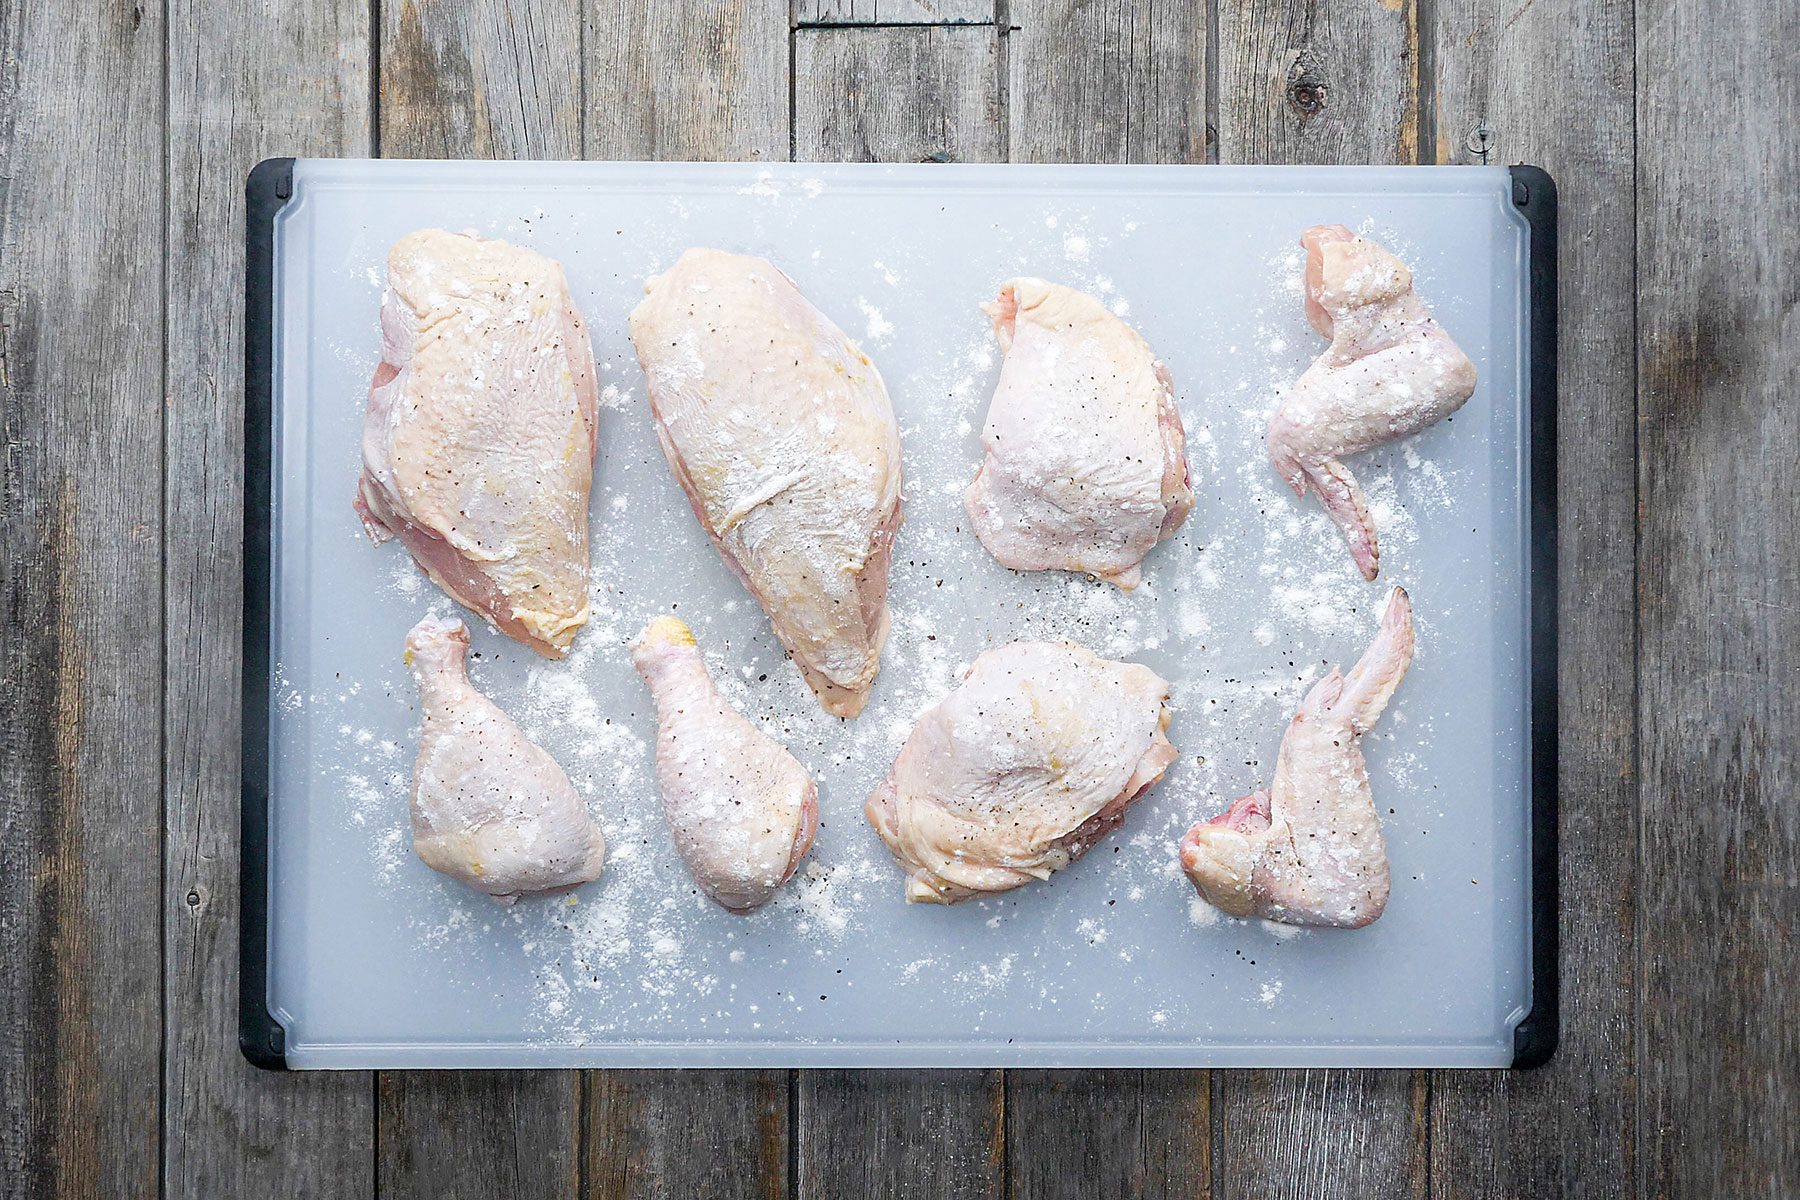 Flour Covered pieces of chicken on cutting board